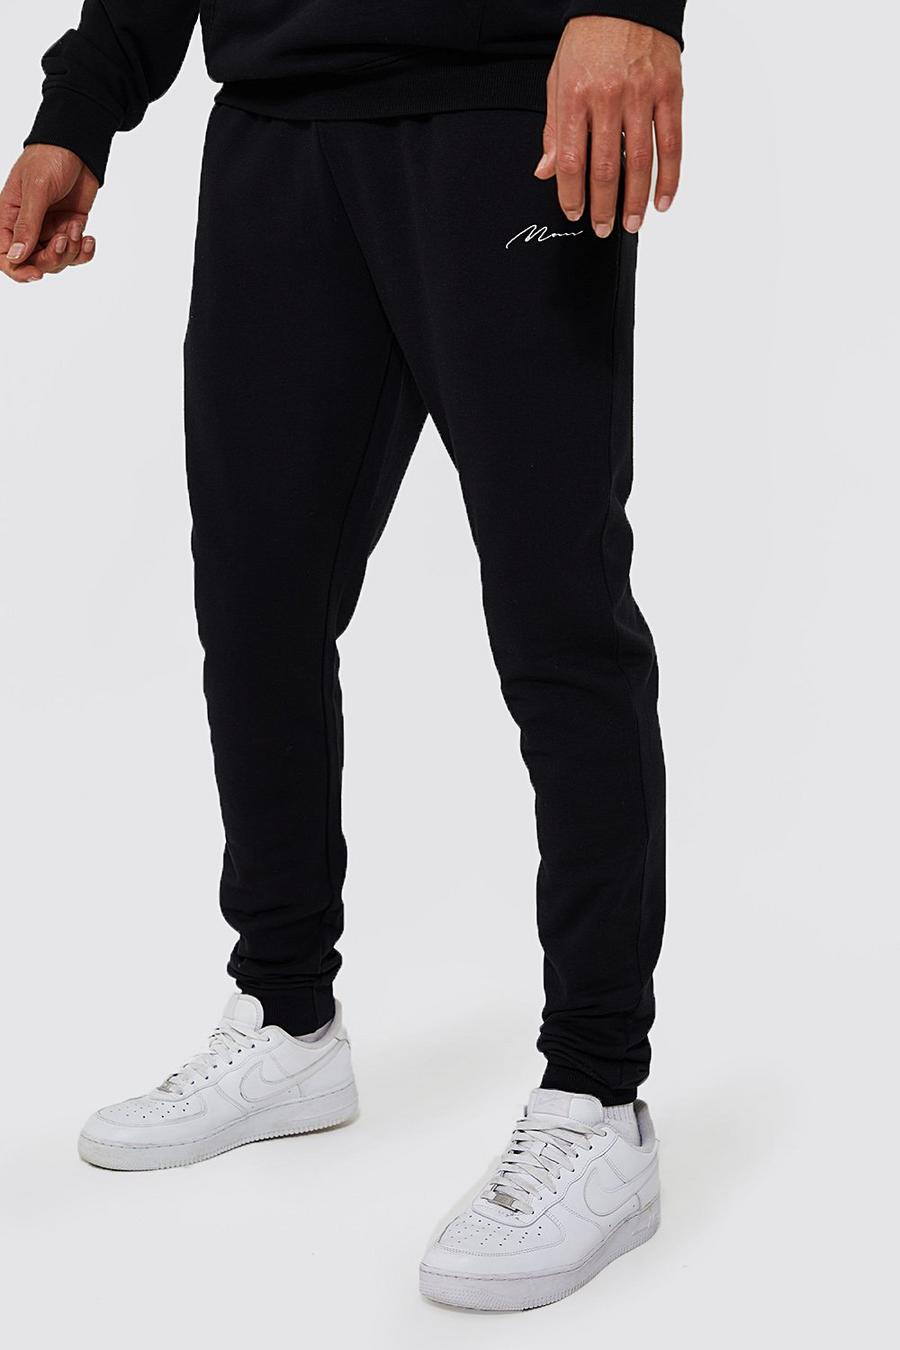 Black Tall Man Skinny Jogger with REEL Cotton